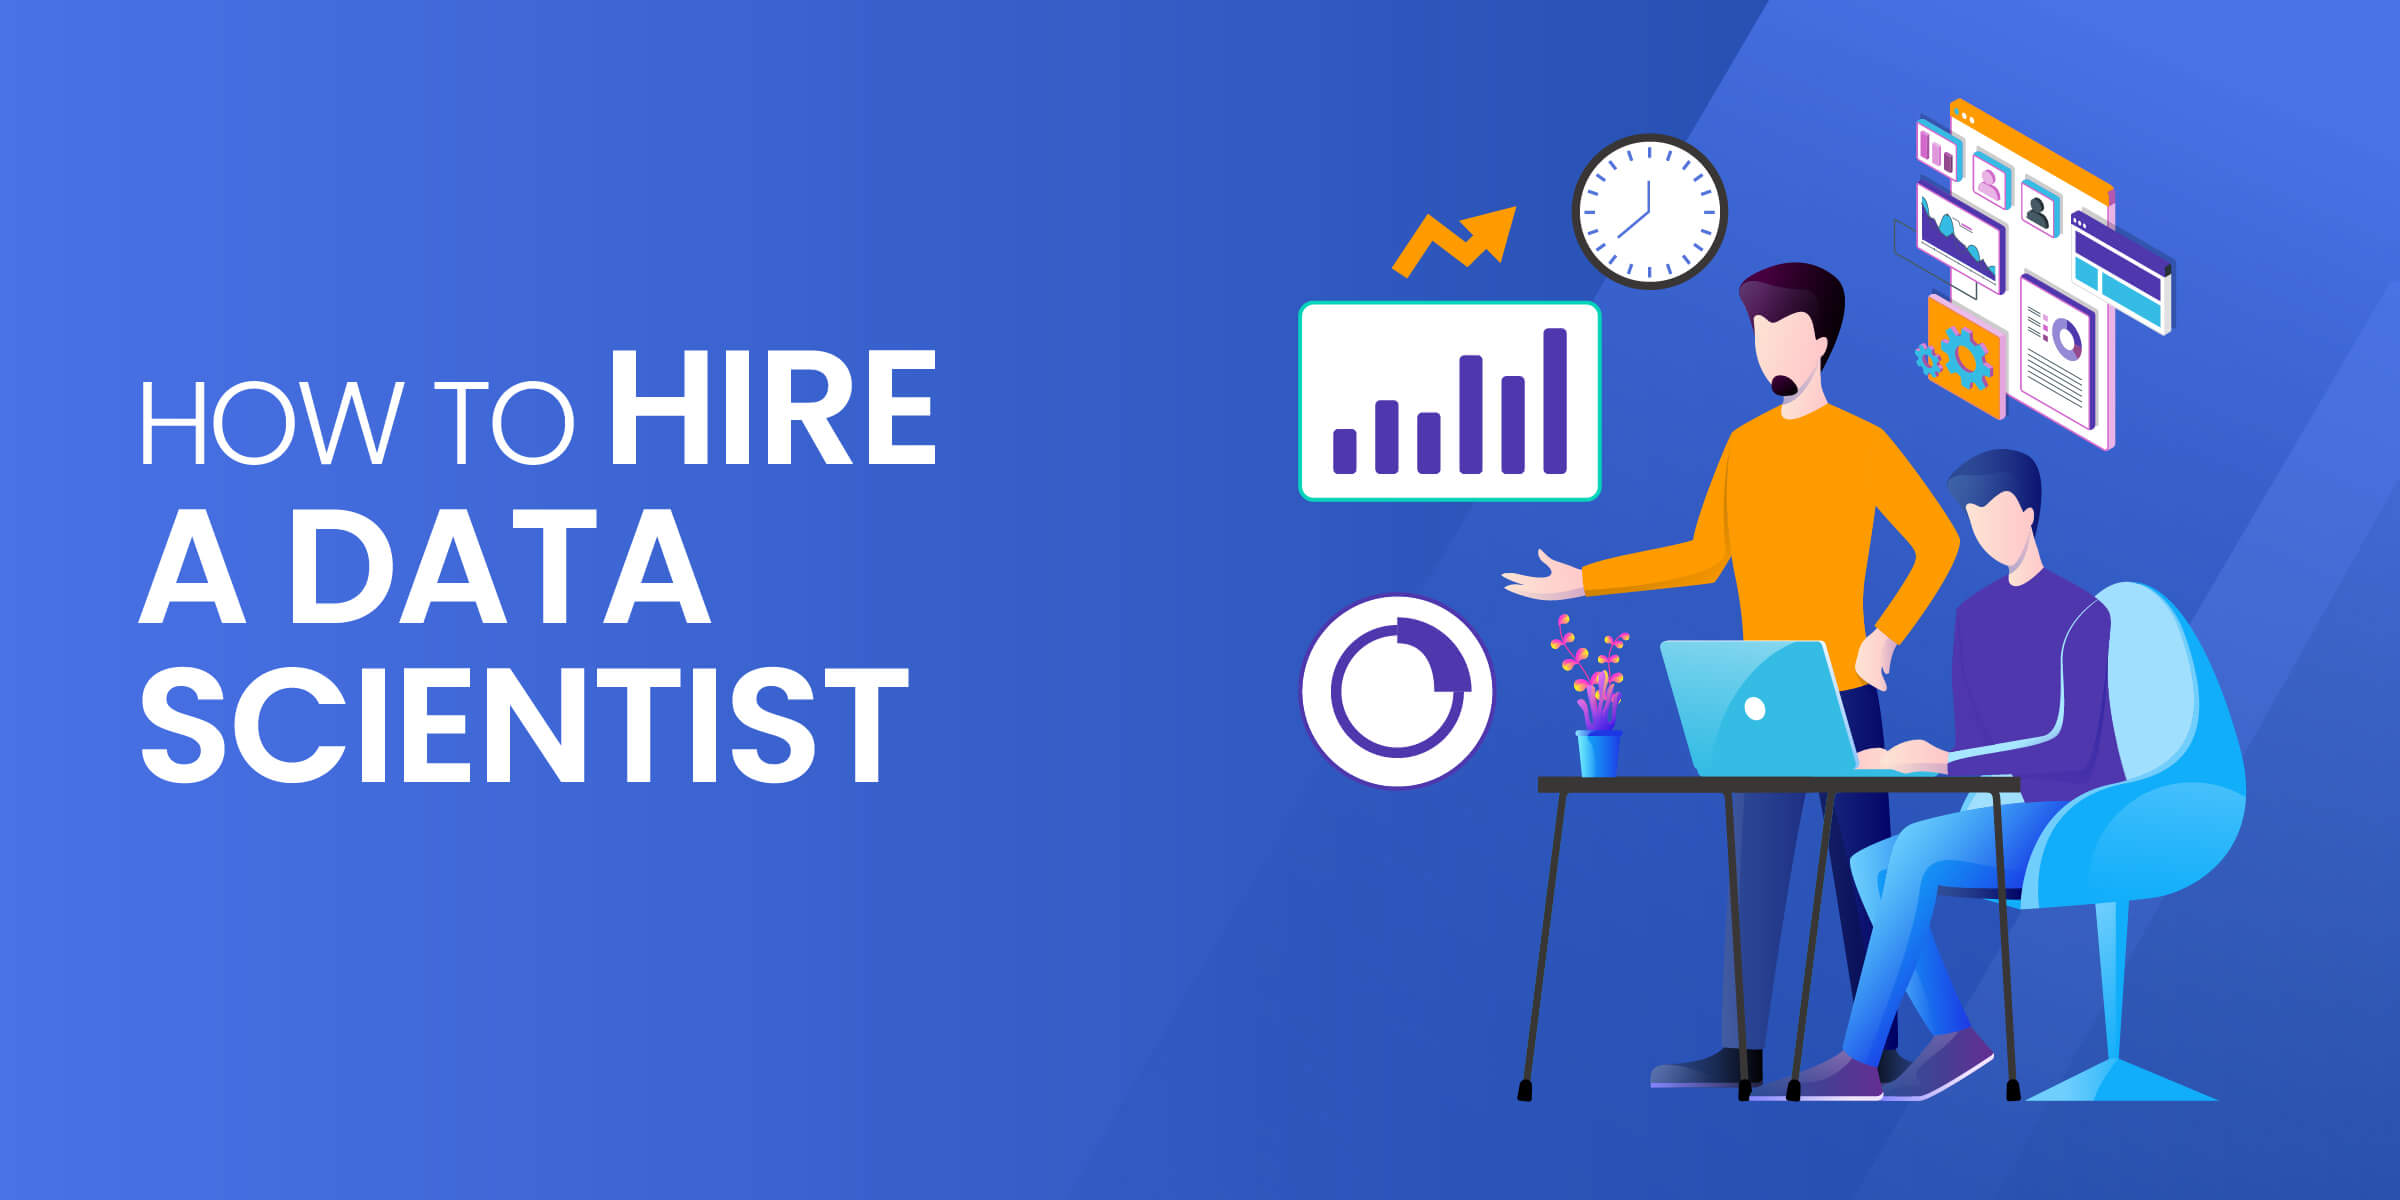 How to Hire Data Scientist